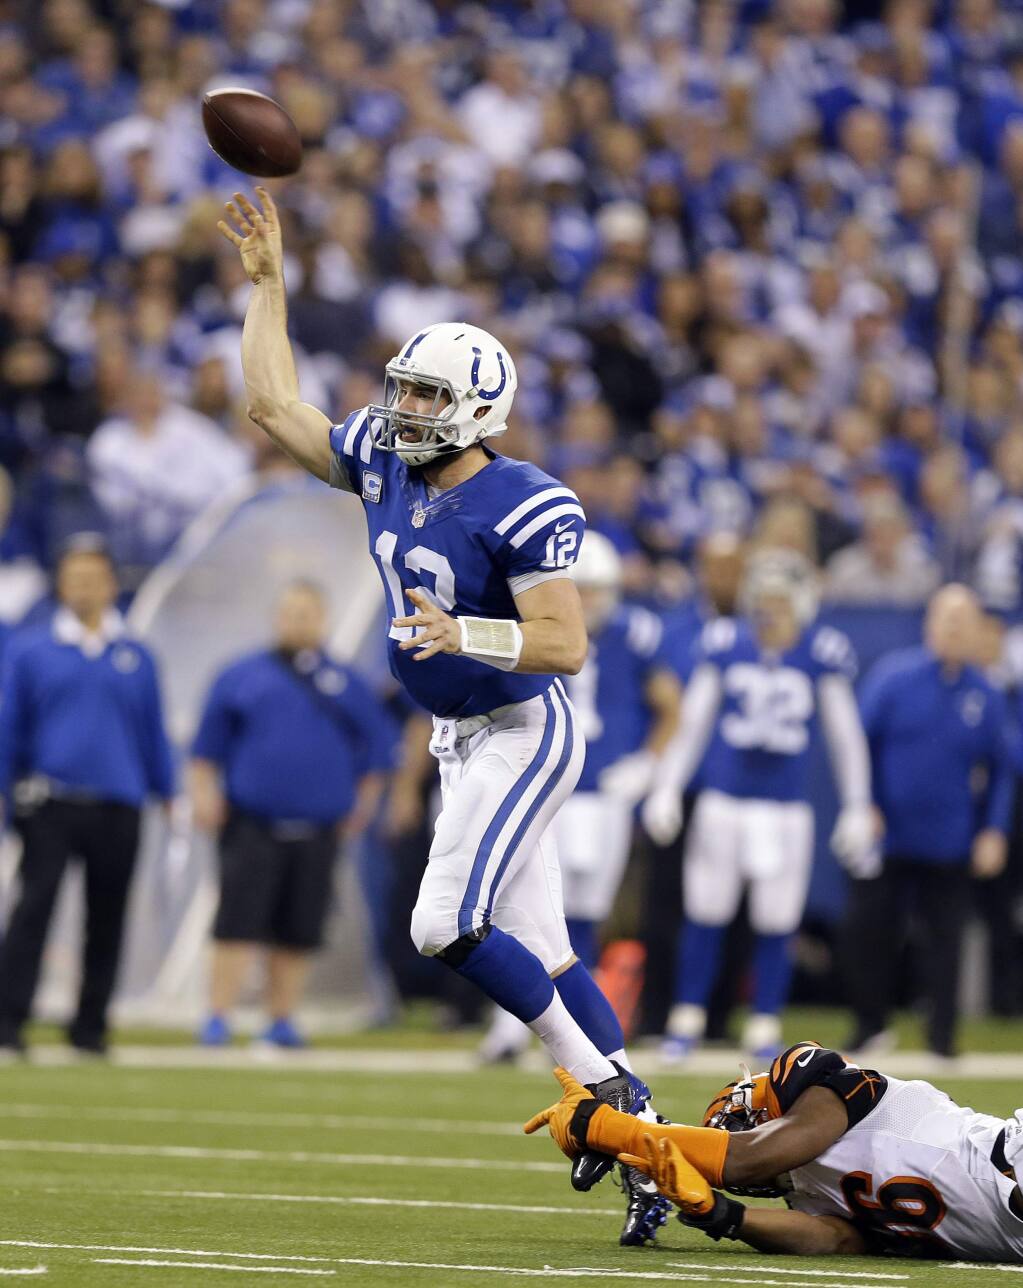 Andrew Luck, Colts extend Bengals' playoff frustration (w/video)